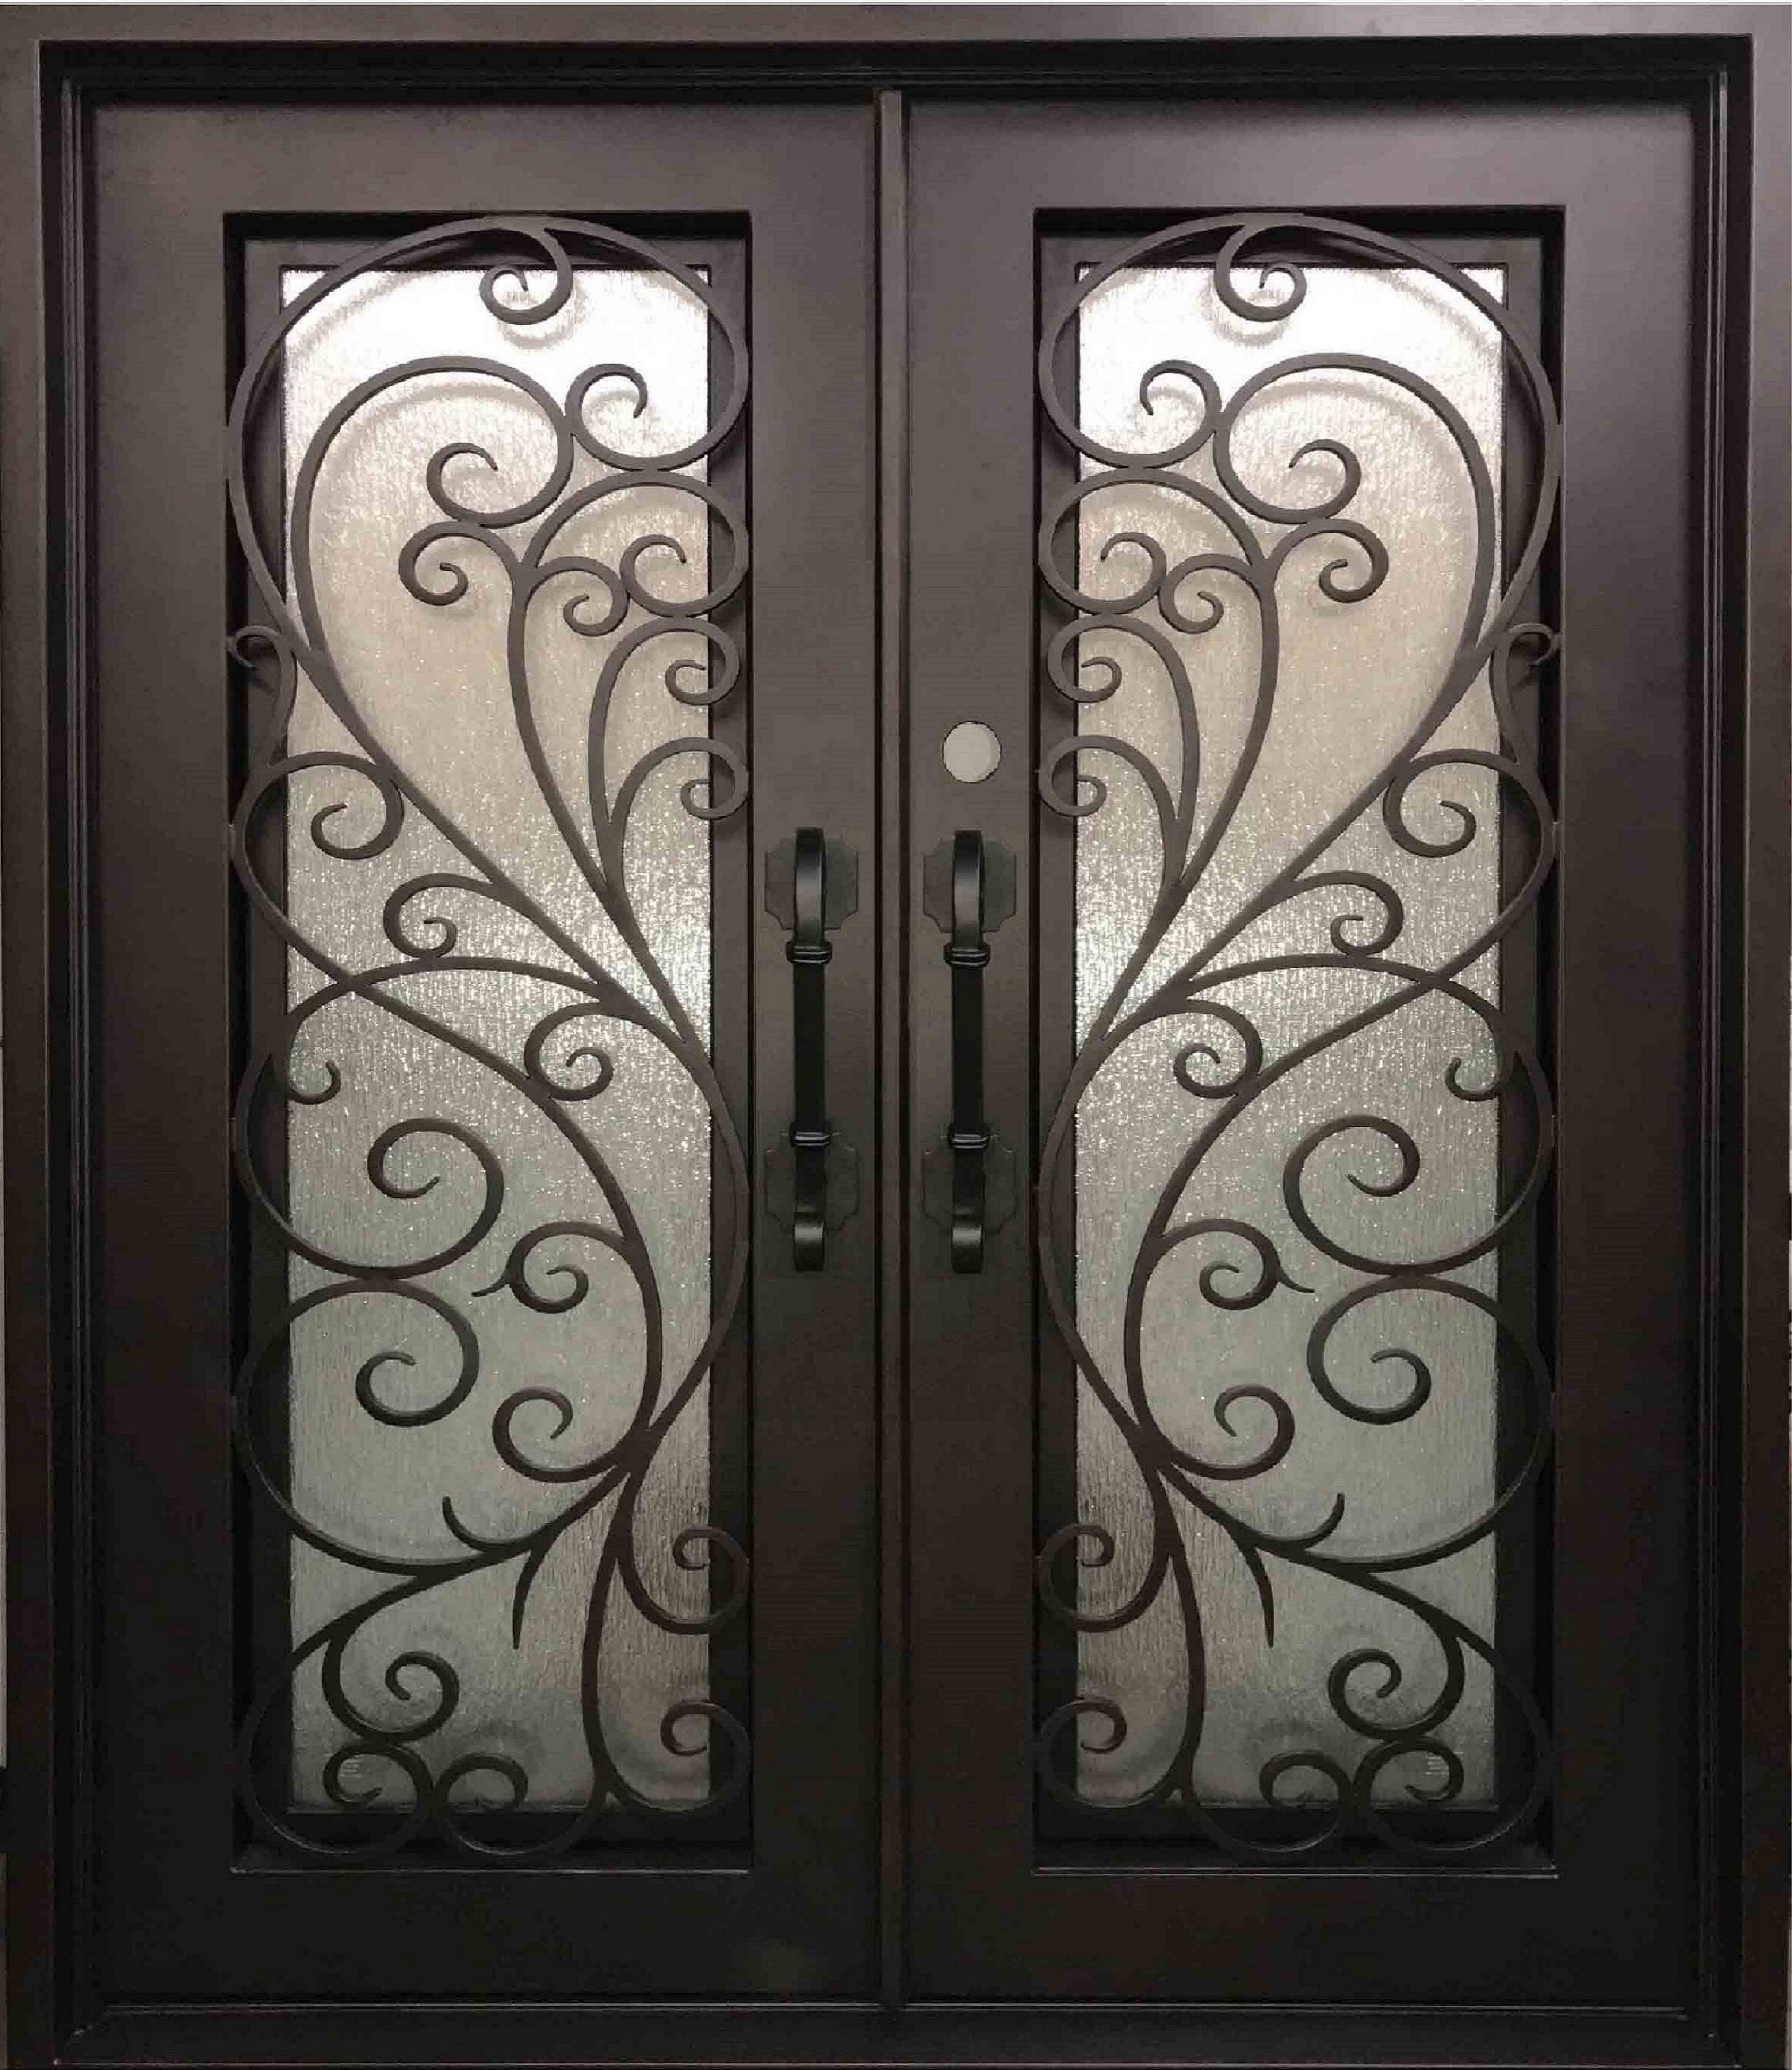 AZALEA- square top, front entry wrought iron doors, removable bug screen-72x81 Right Hand - Door Gate Depot